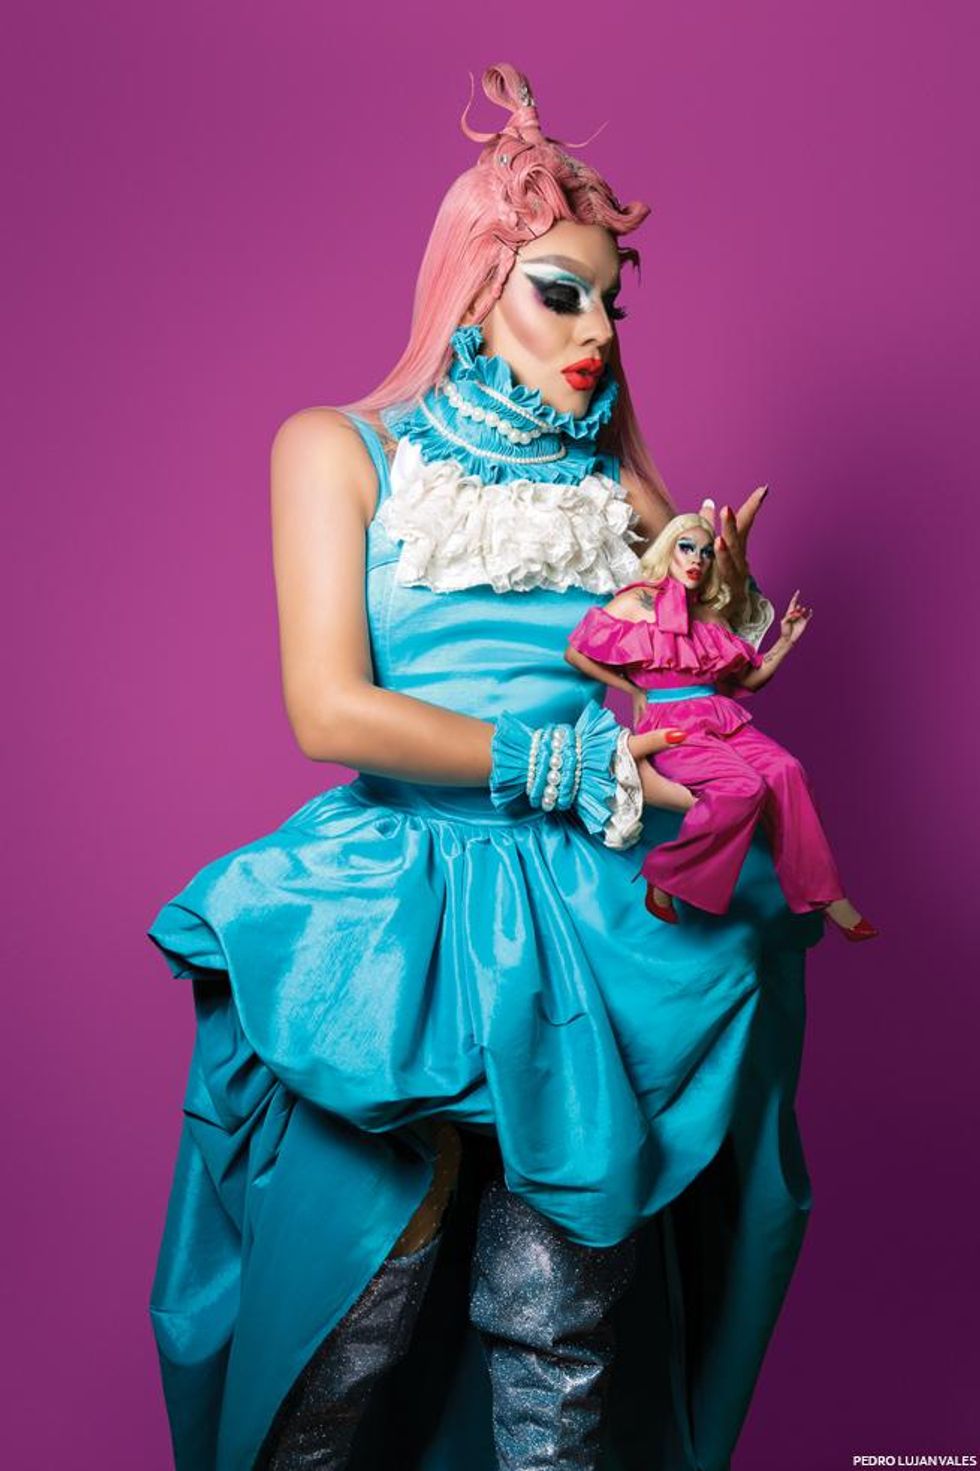 10 Photos of Mexico City Drag Queens You Need to See